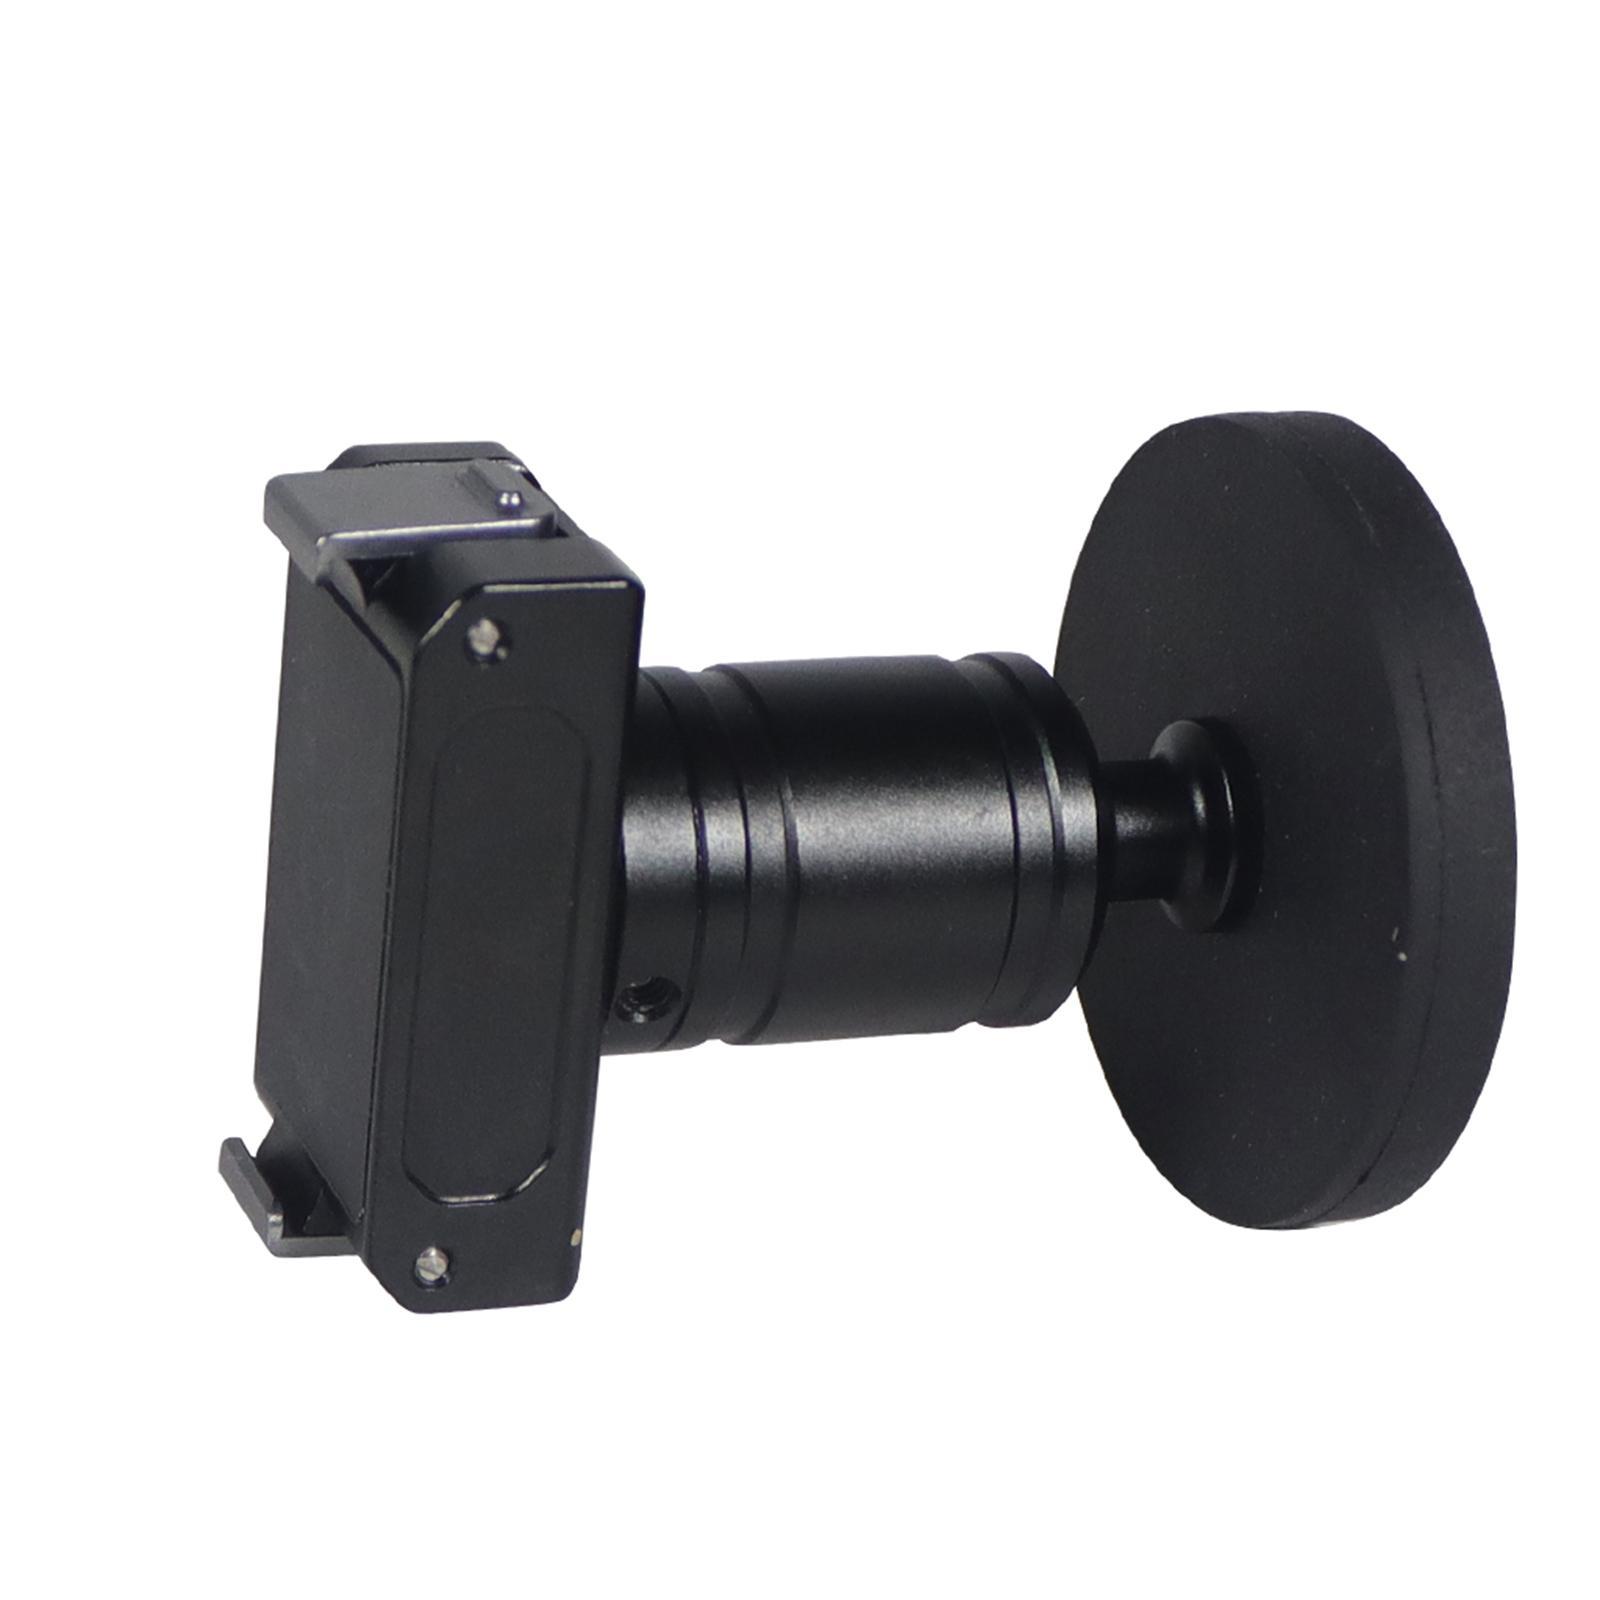 Camera Mount 360 Degree Rotation for Action 2 Accessories